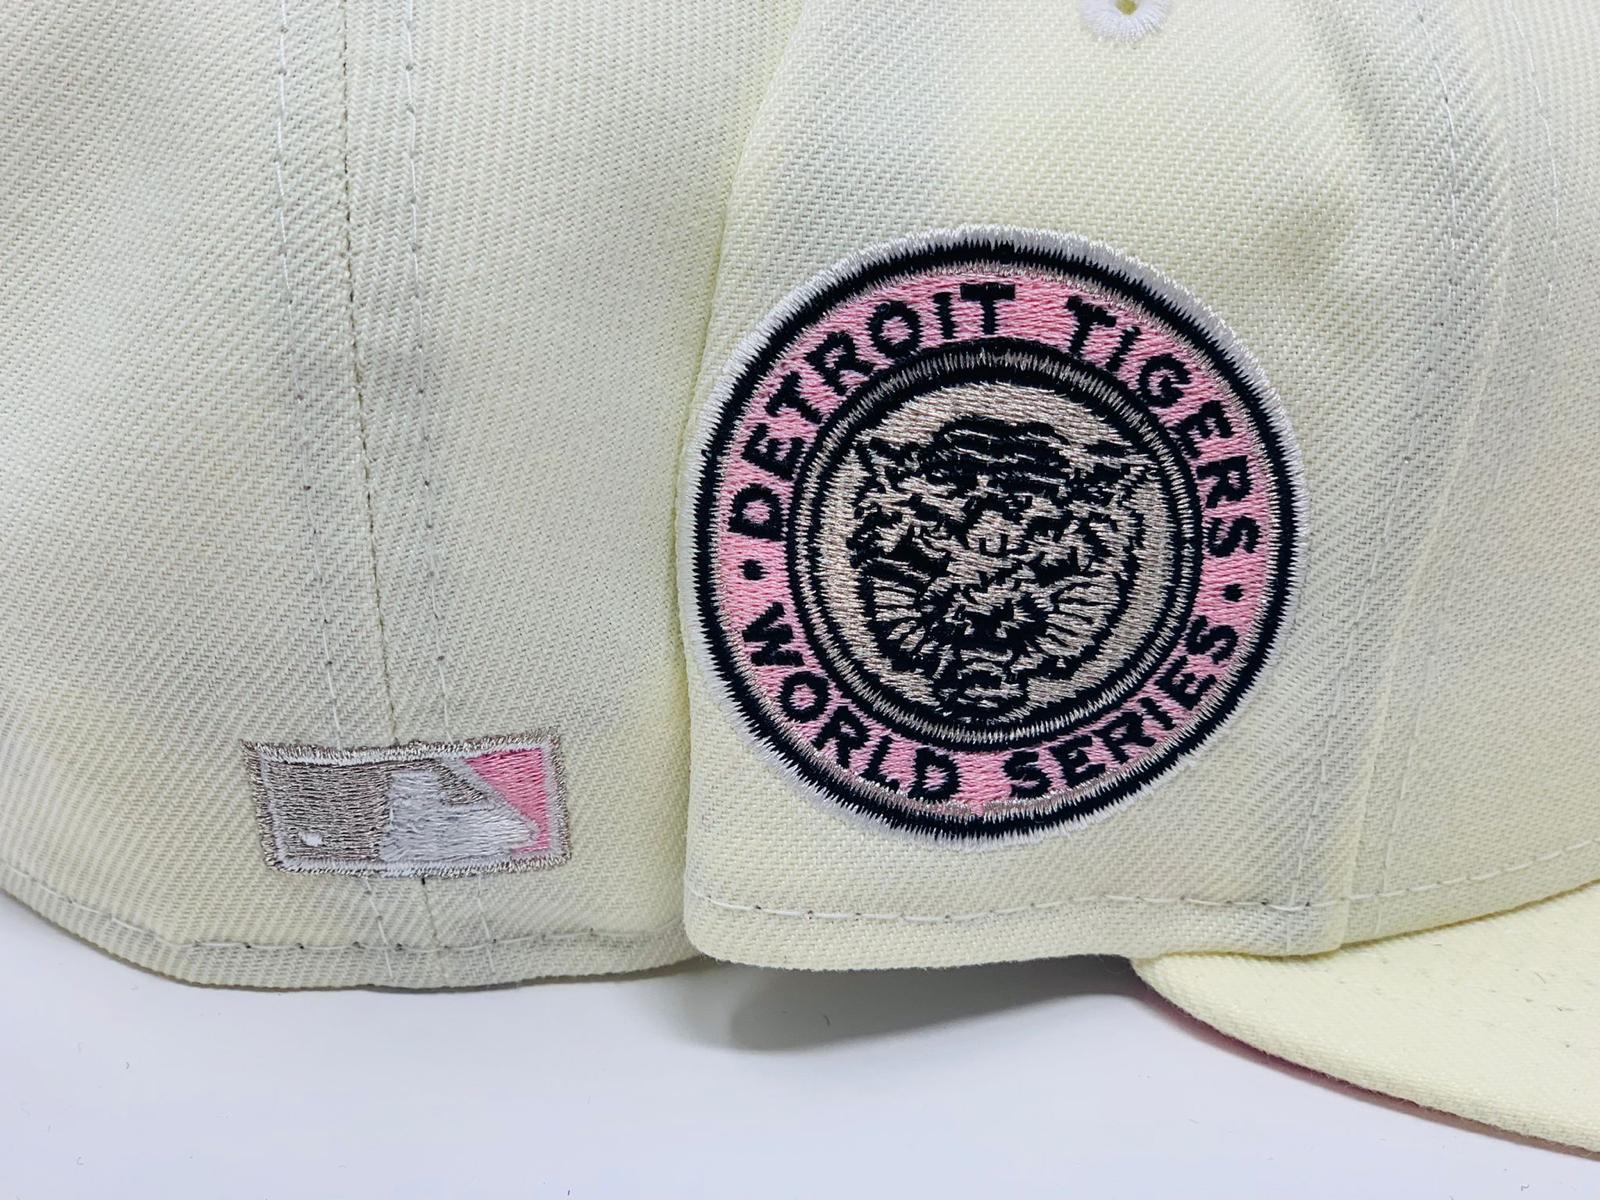 DETROIT TIGERS 1968 WORLD SERIES LIGHT PINK ICY BRIM NEW ERA FITTED HAT 8